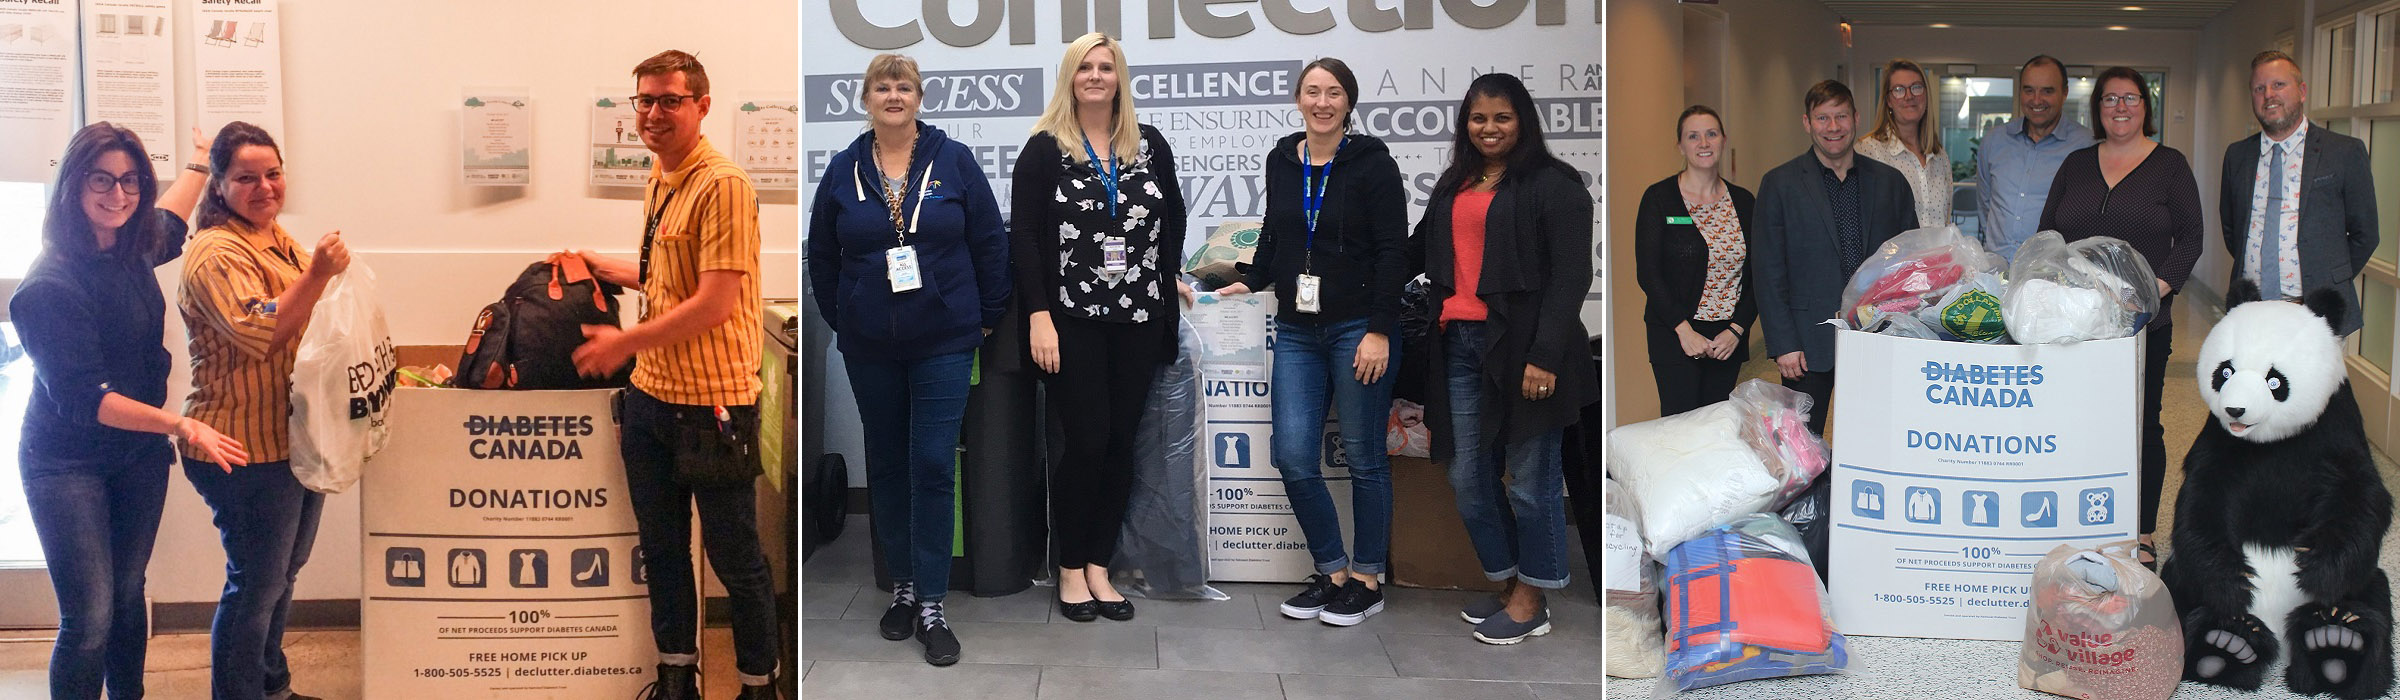 employees from GTA organizations participate in recycling collection drive